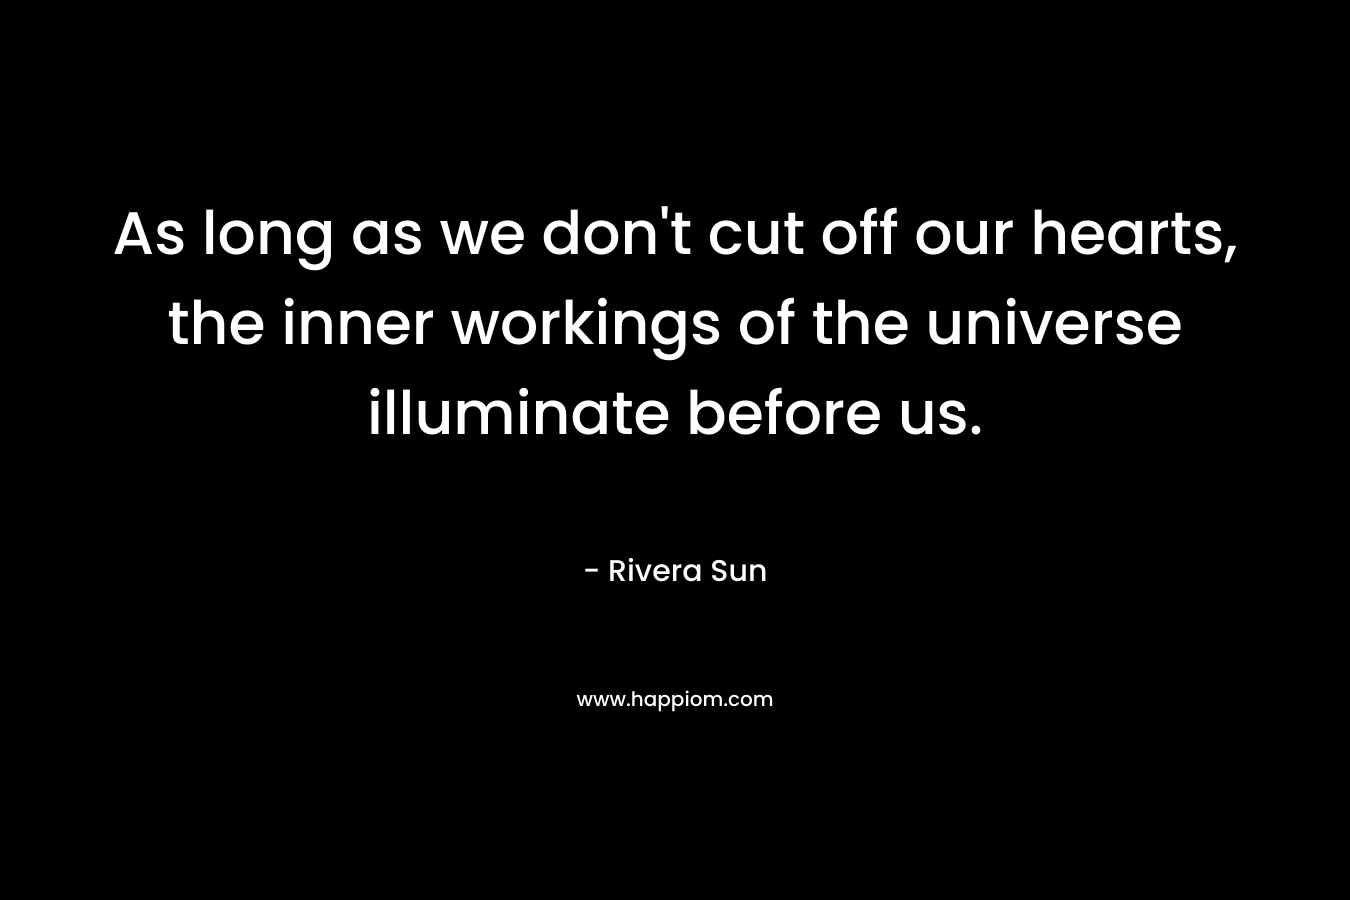 As long as we don’t cut off our hearts, the inner workings of the universe illuminate before us. – Rivera Sun